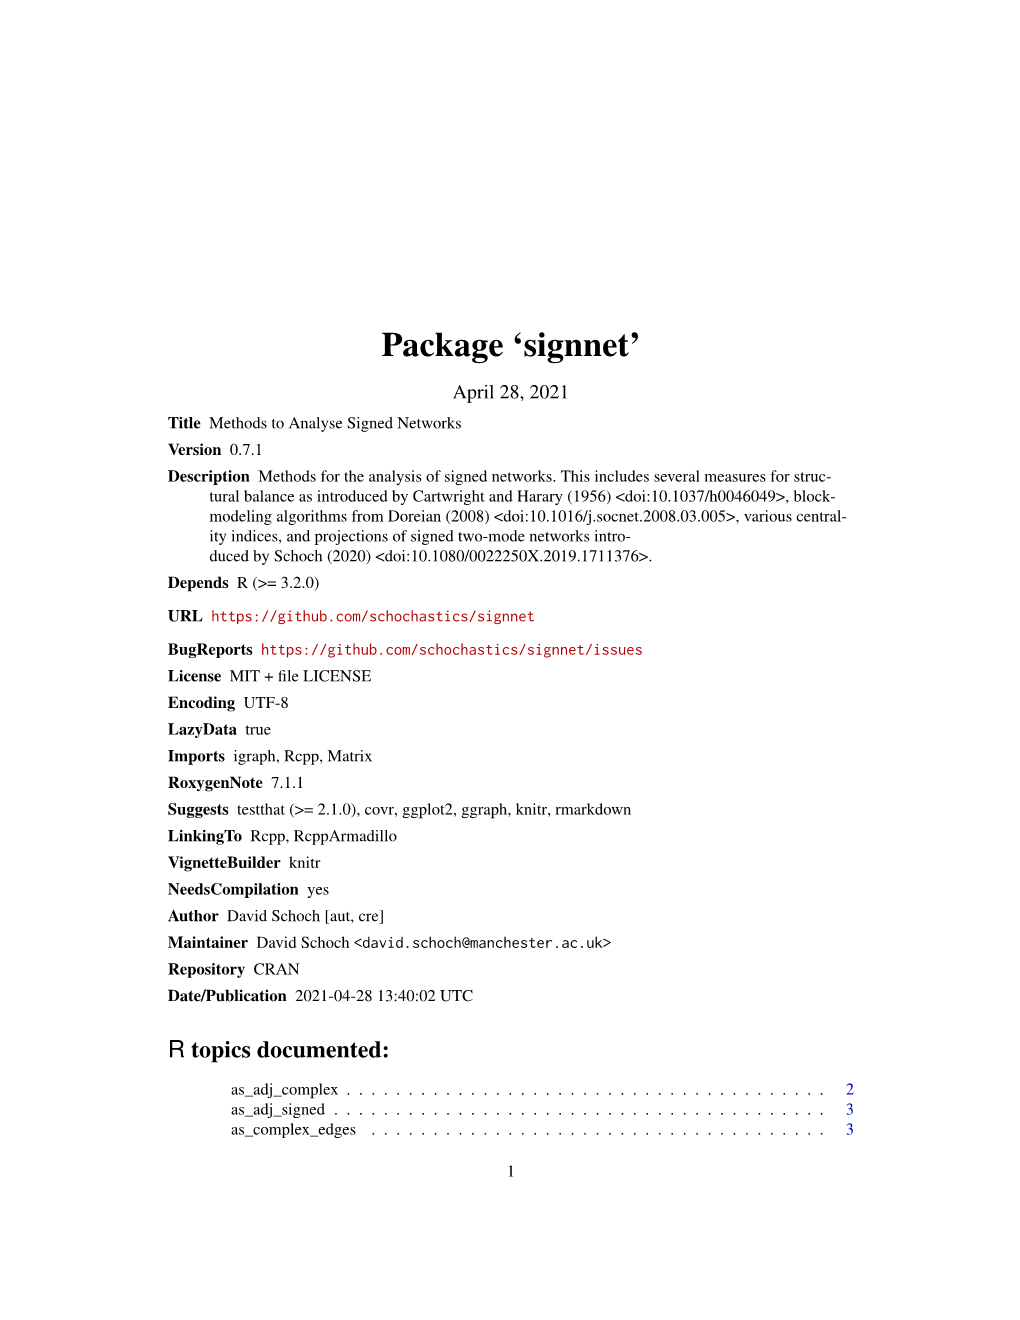 Package 'Signnet'